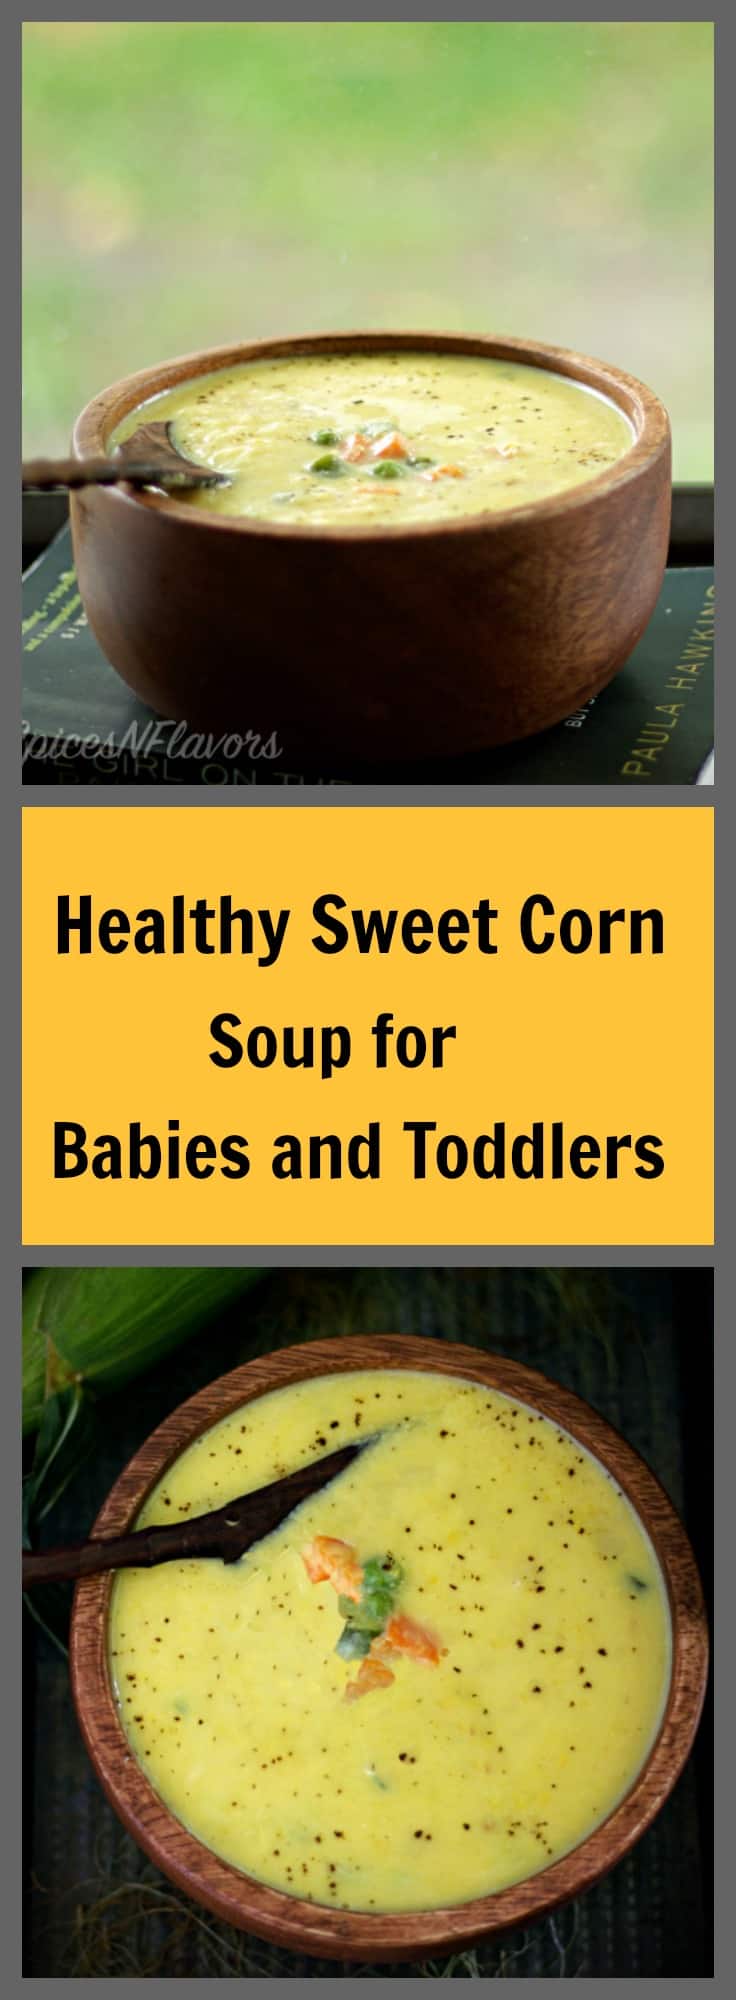 healthy-sweet-corn-soup-for-babies